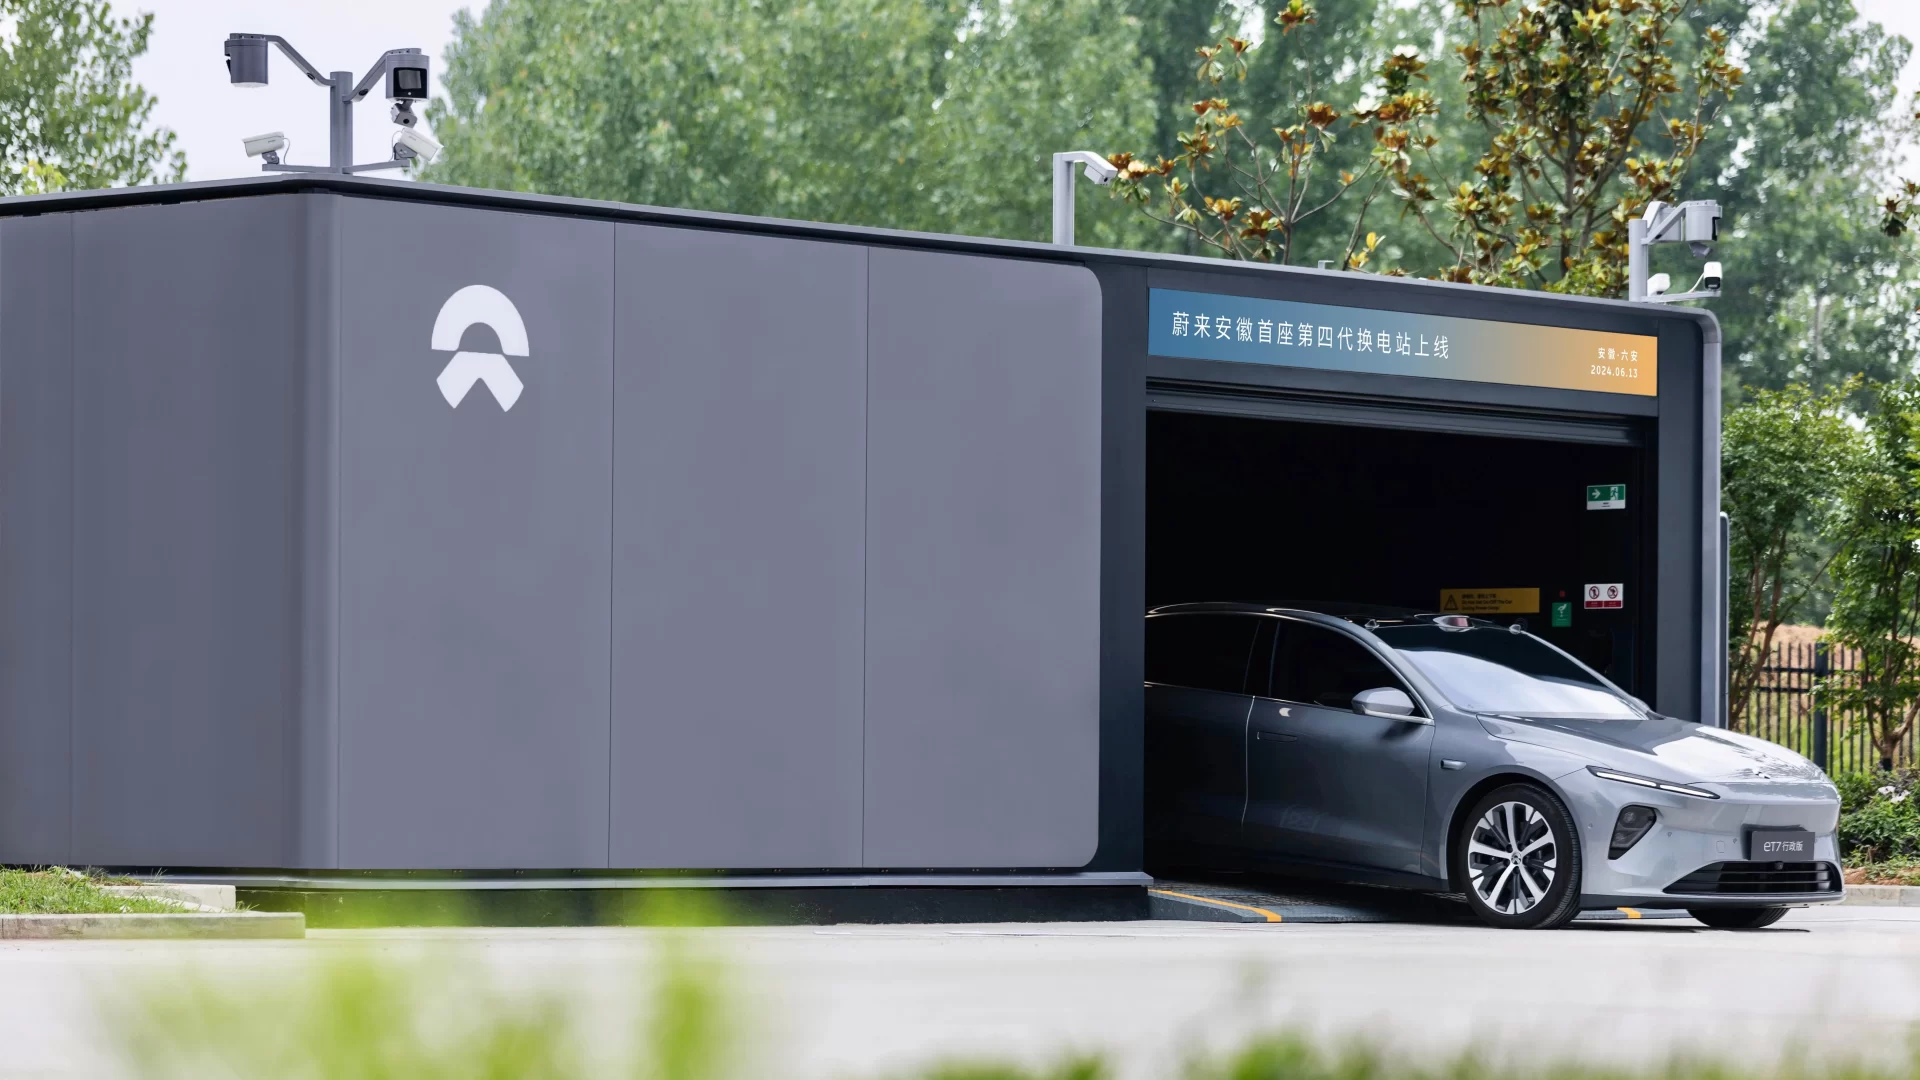 NIO's Power Swap Station 4.0, now operational, offers faster, automated battery swaps in just 144 seconds, supports multiple brands, and features advanced technology for a seamless EV experience.